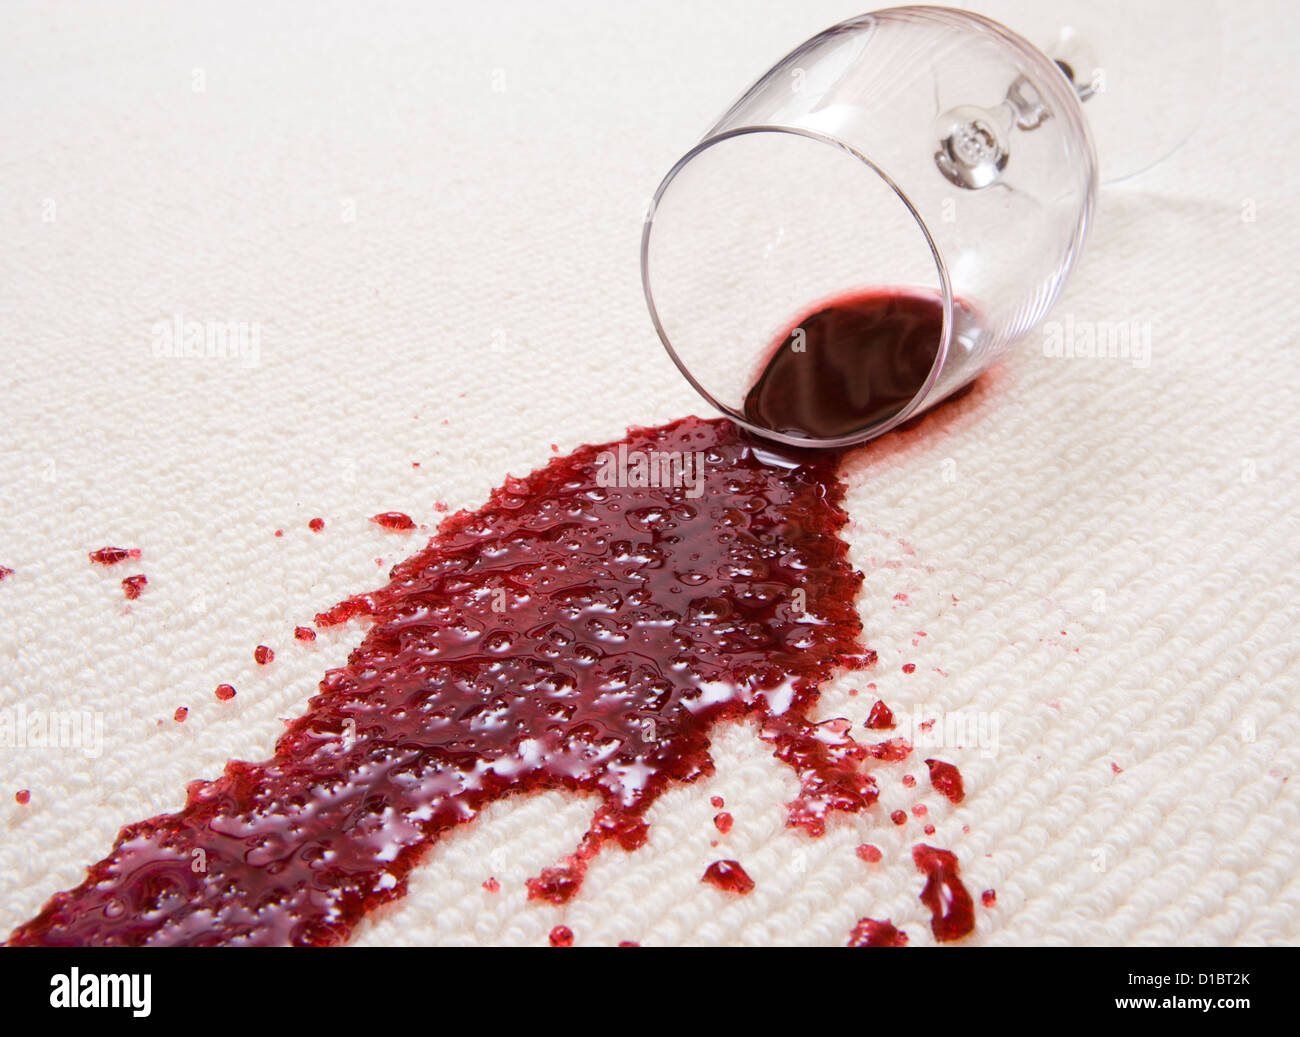 Red wine spilled on carpet. Stock Photo